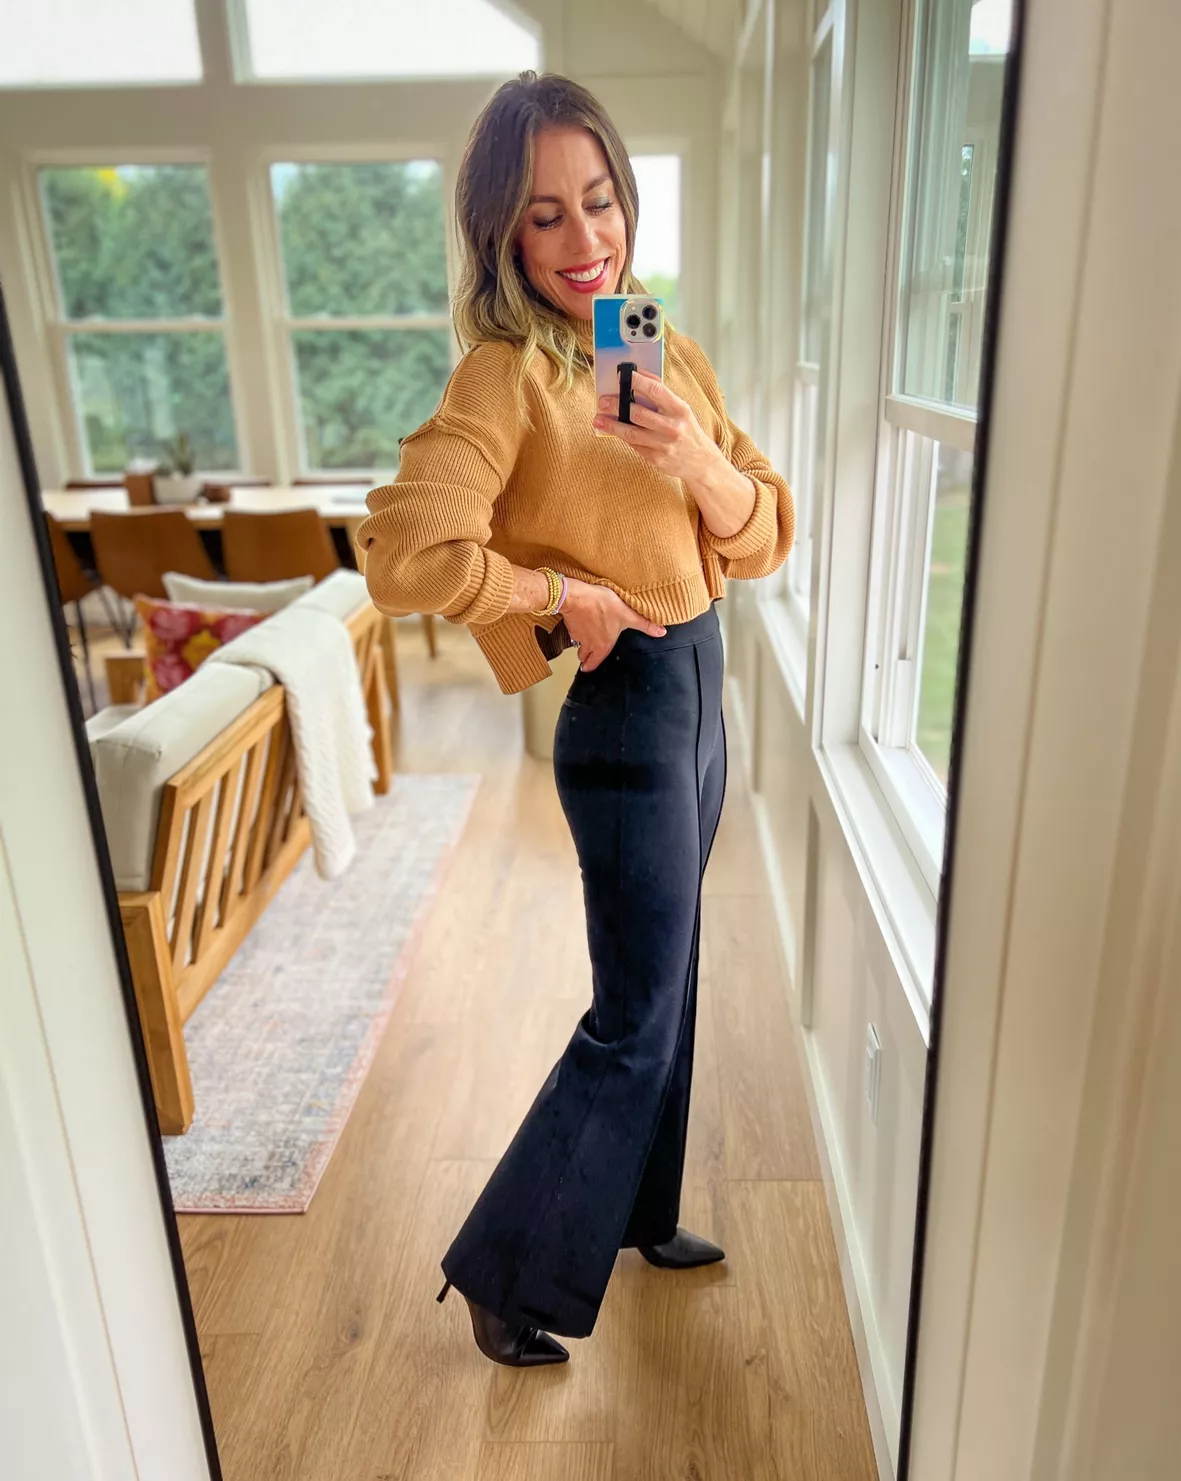 Spanx, The Perfect Pant High Rise Flare